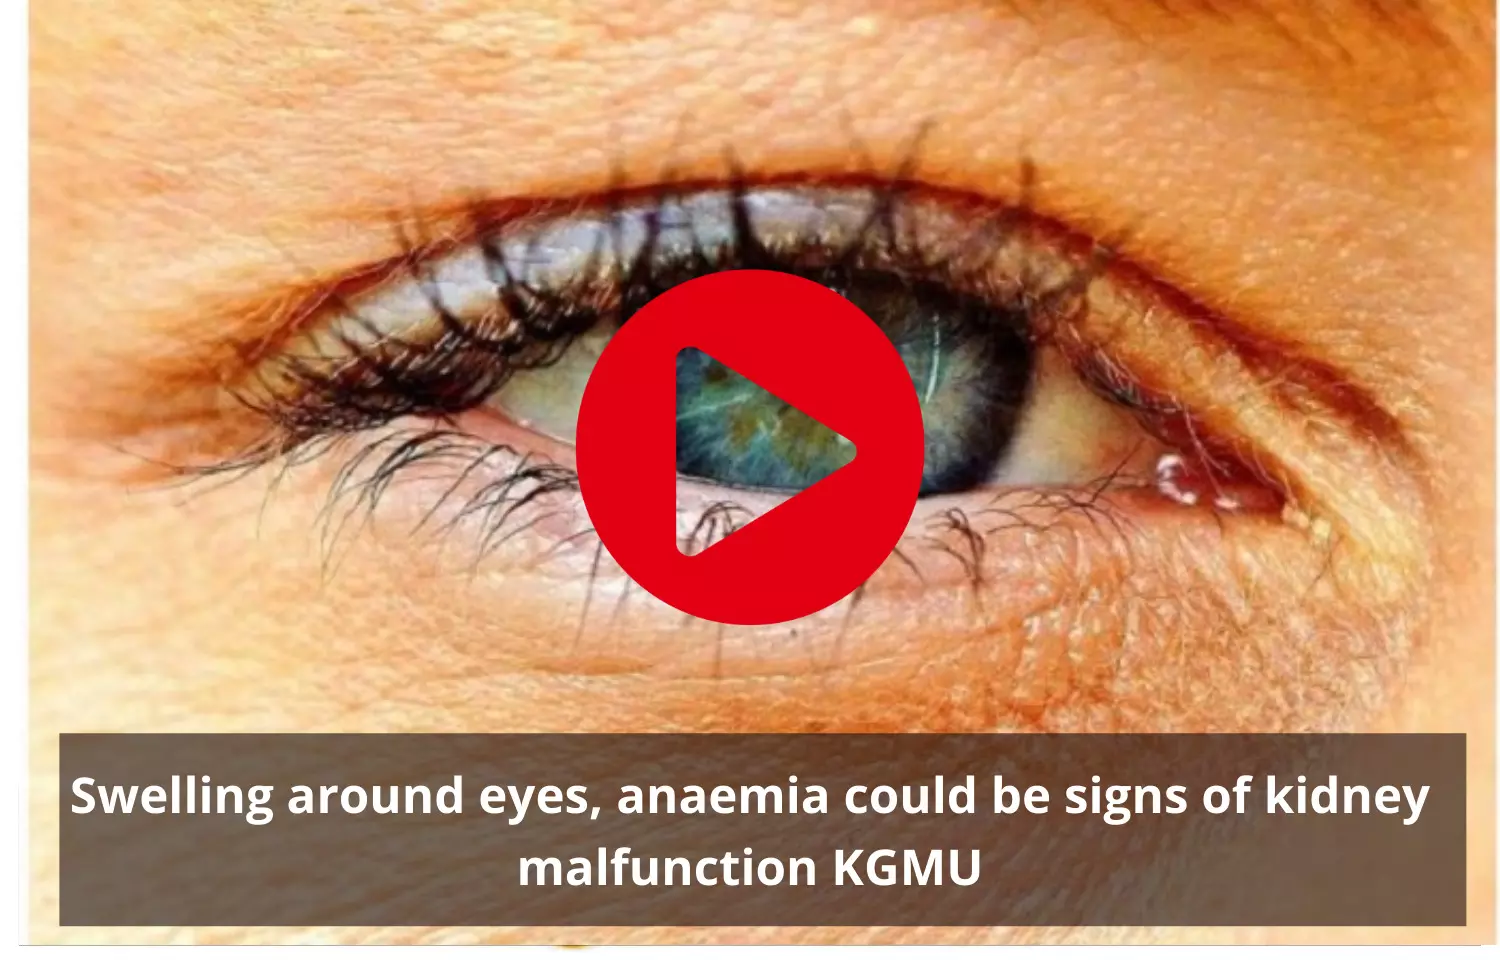 Swelling around eyes, anaemia could be signs of kidney malfunction KGMU